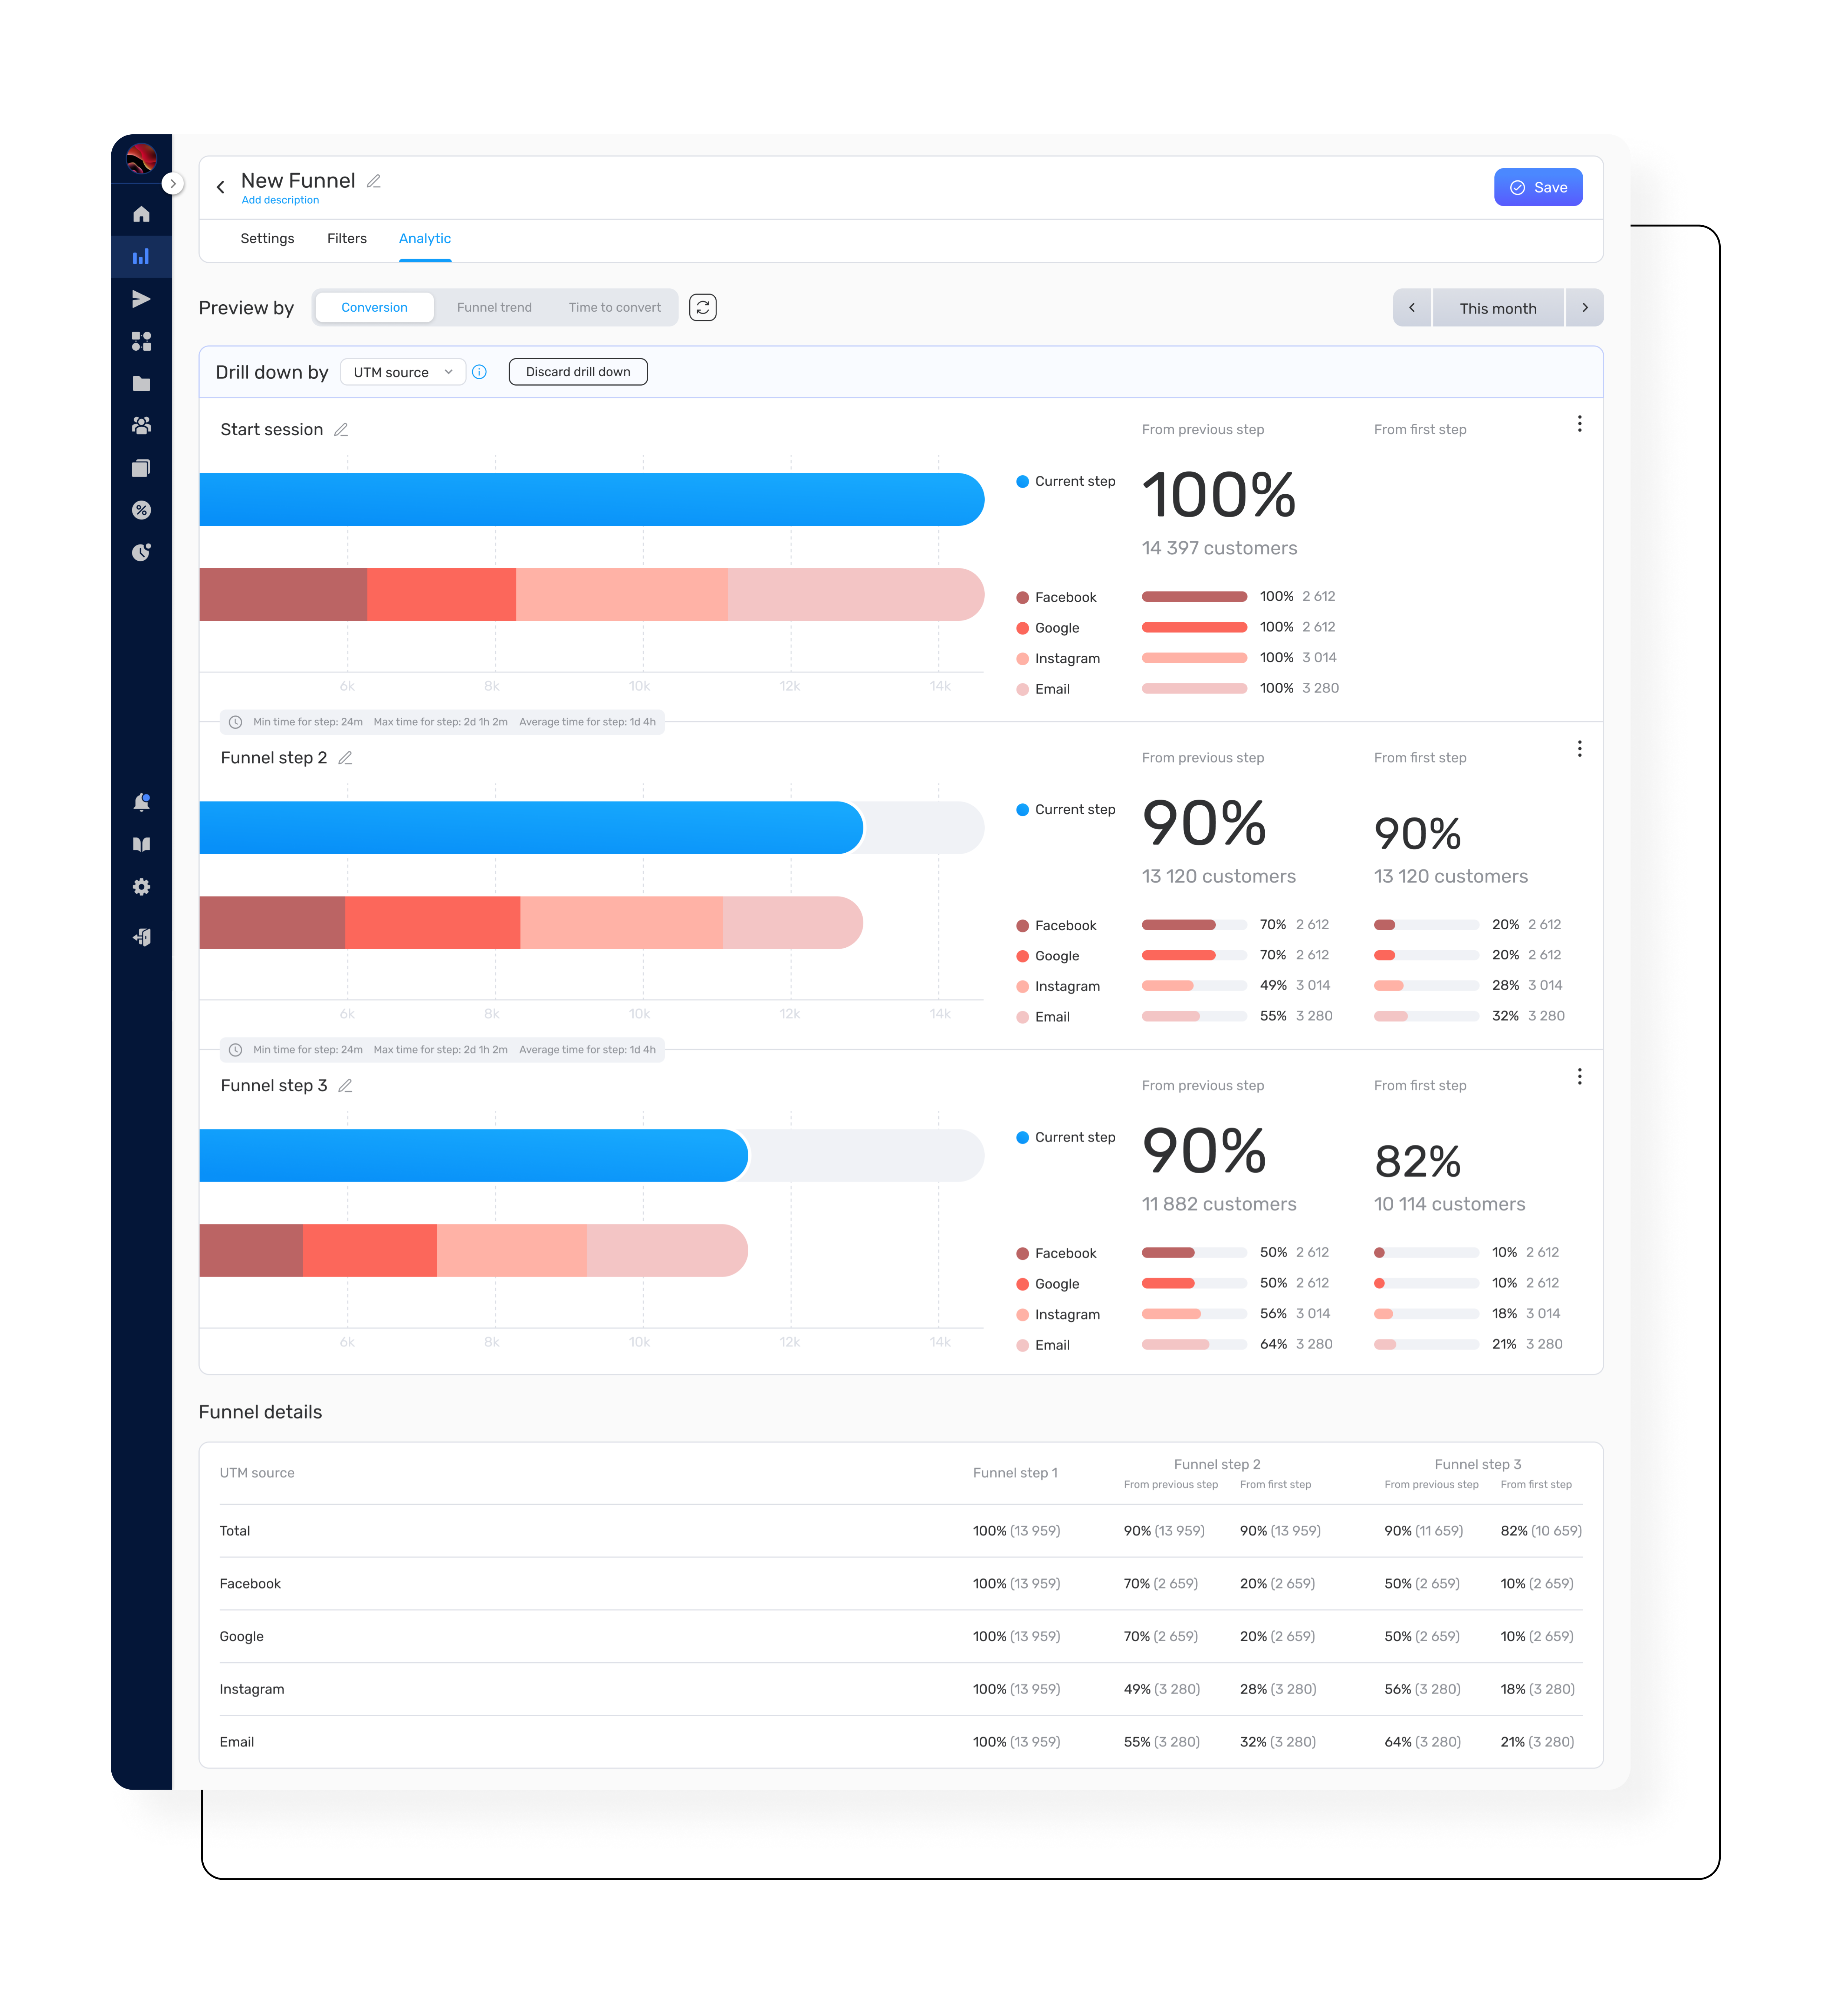 The funnel analytics feature offers a big-picture view of customer interaction with your marketing efforts, pulling information from lots of different sources, like websites, email and SMS campaigns, and A/B tests you've run.